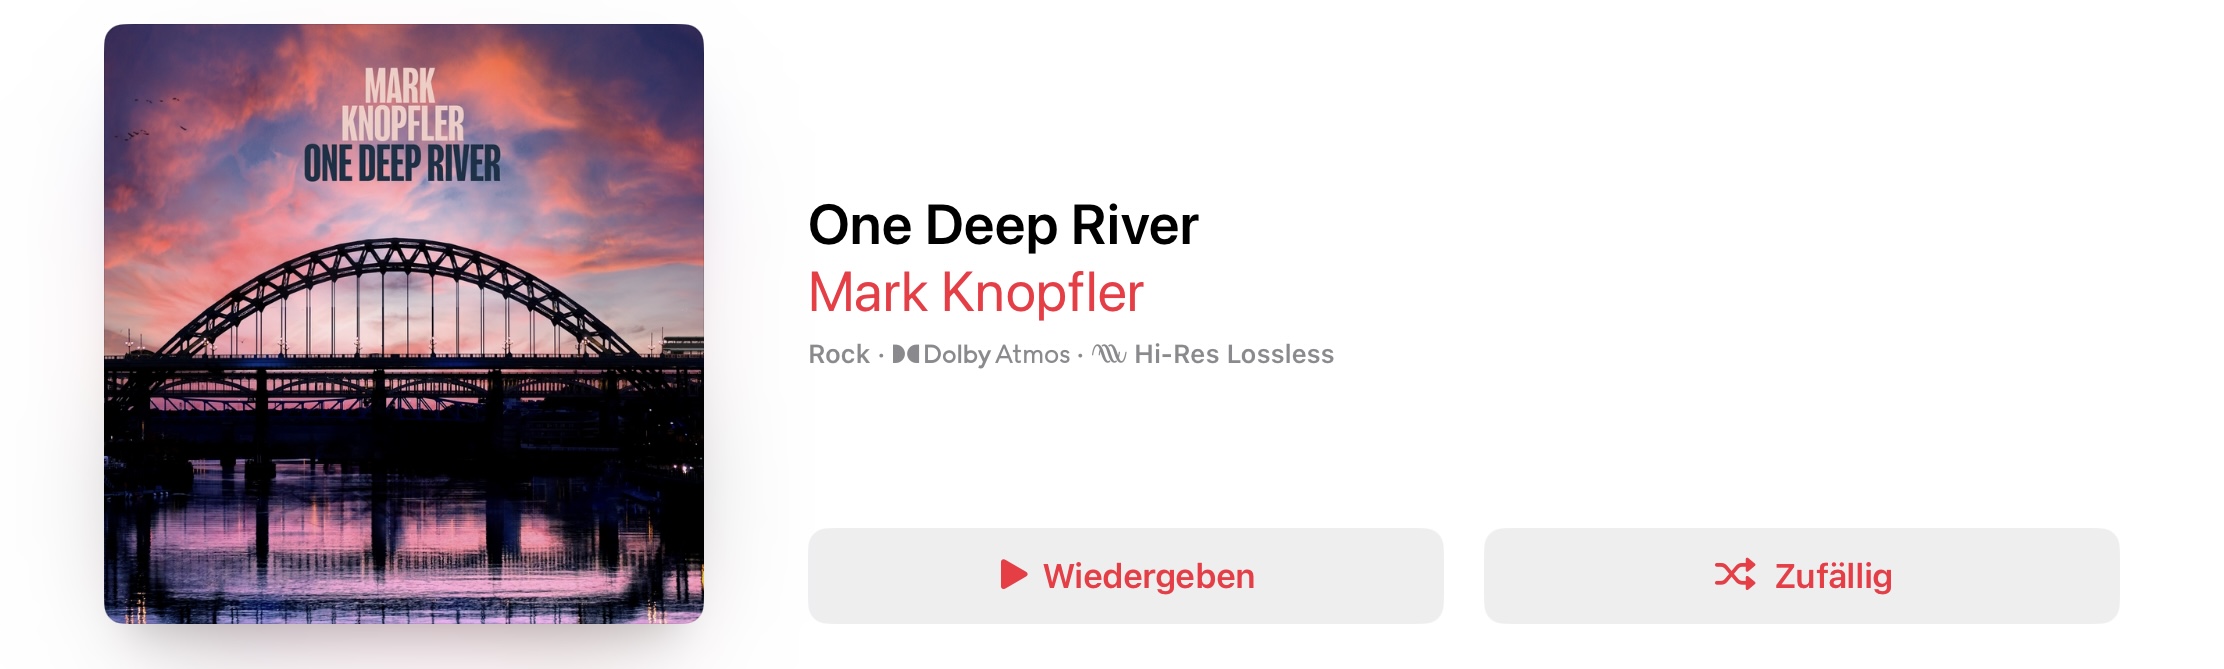 Marc Knopfler One Deep River Dolby Atmos